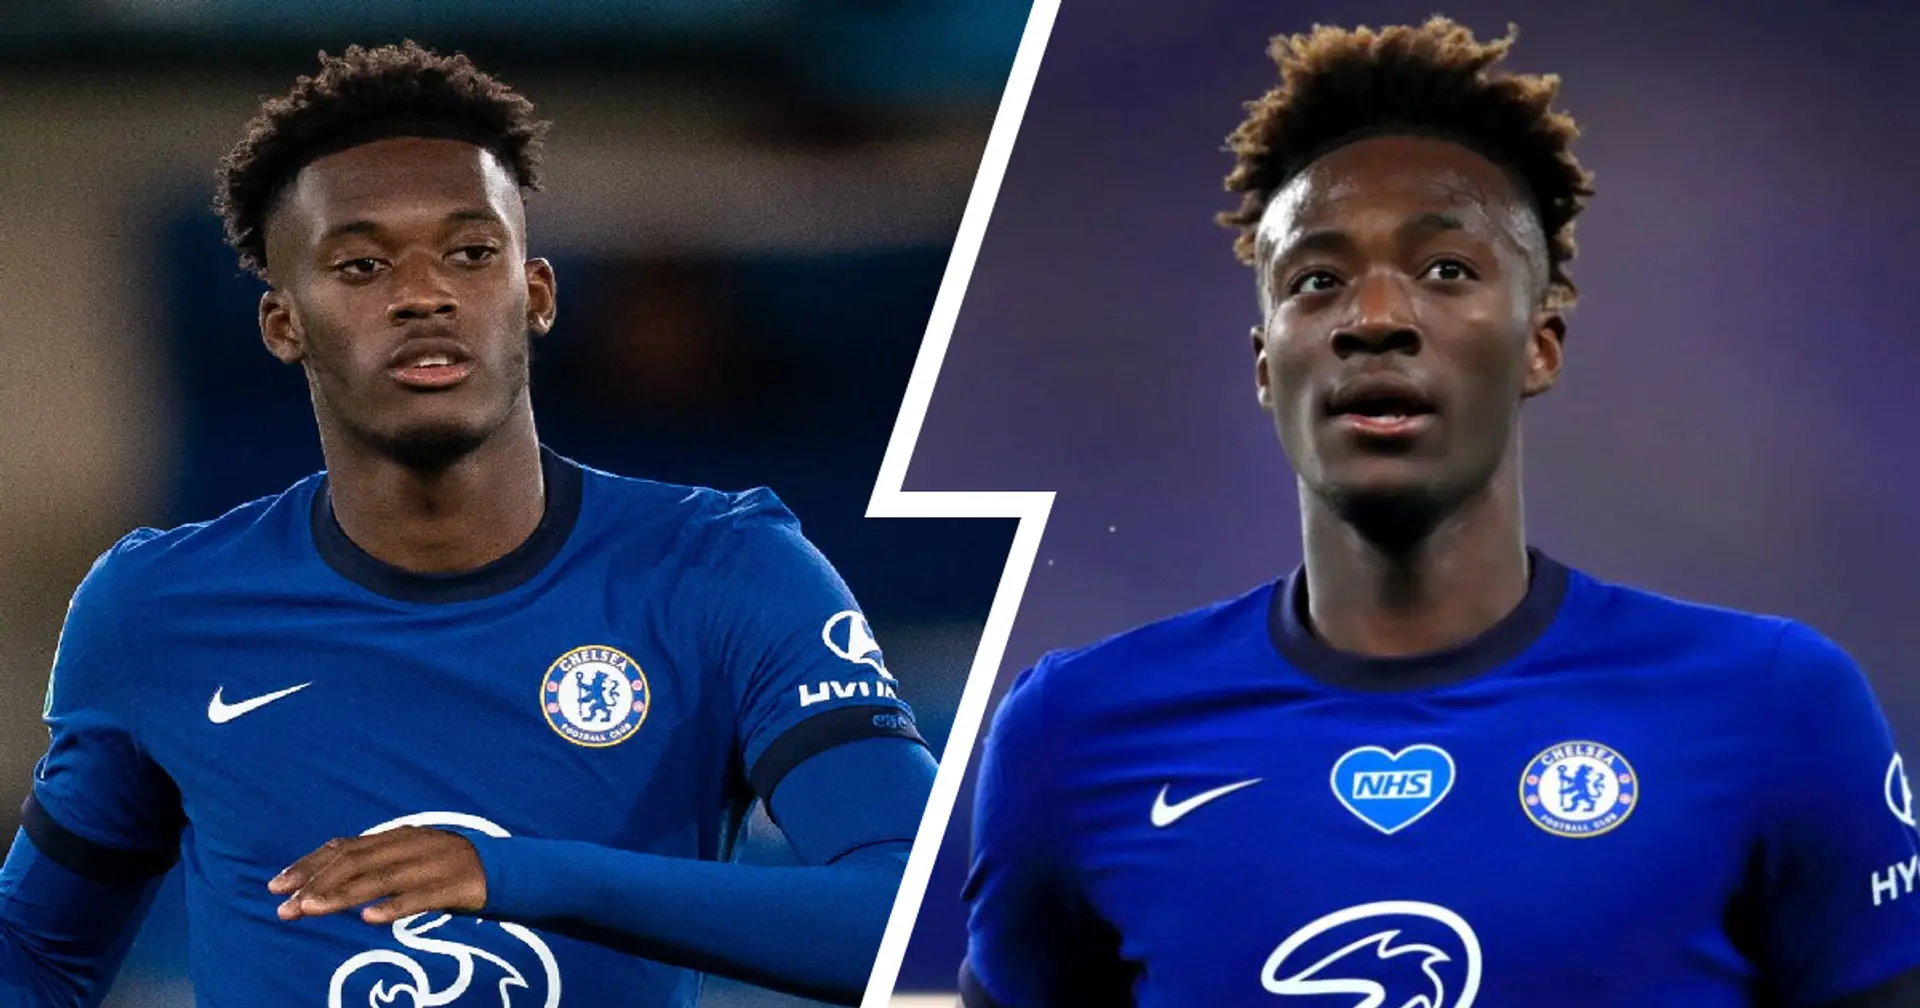 Bayern Munich end interest in Hudson-Odoi & 3 more big stories at Chelsea you might've missed